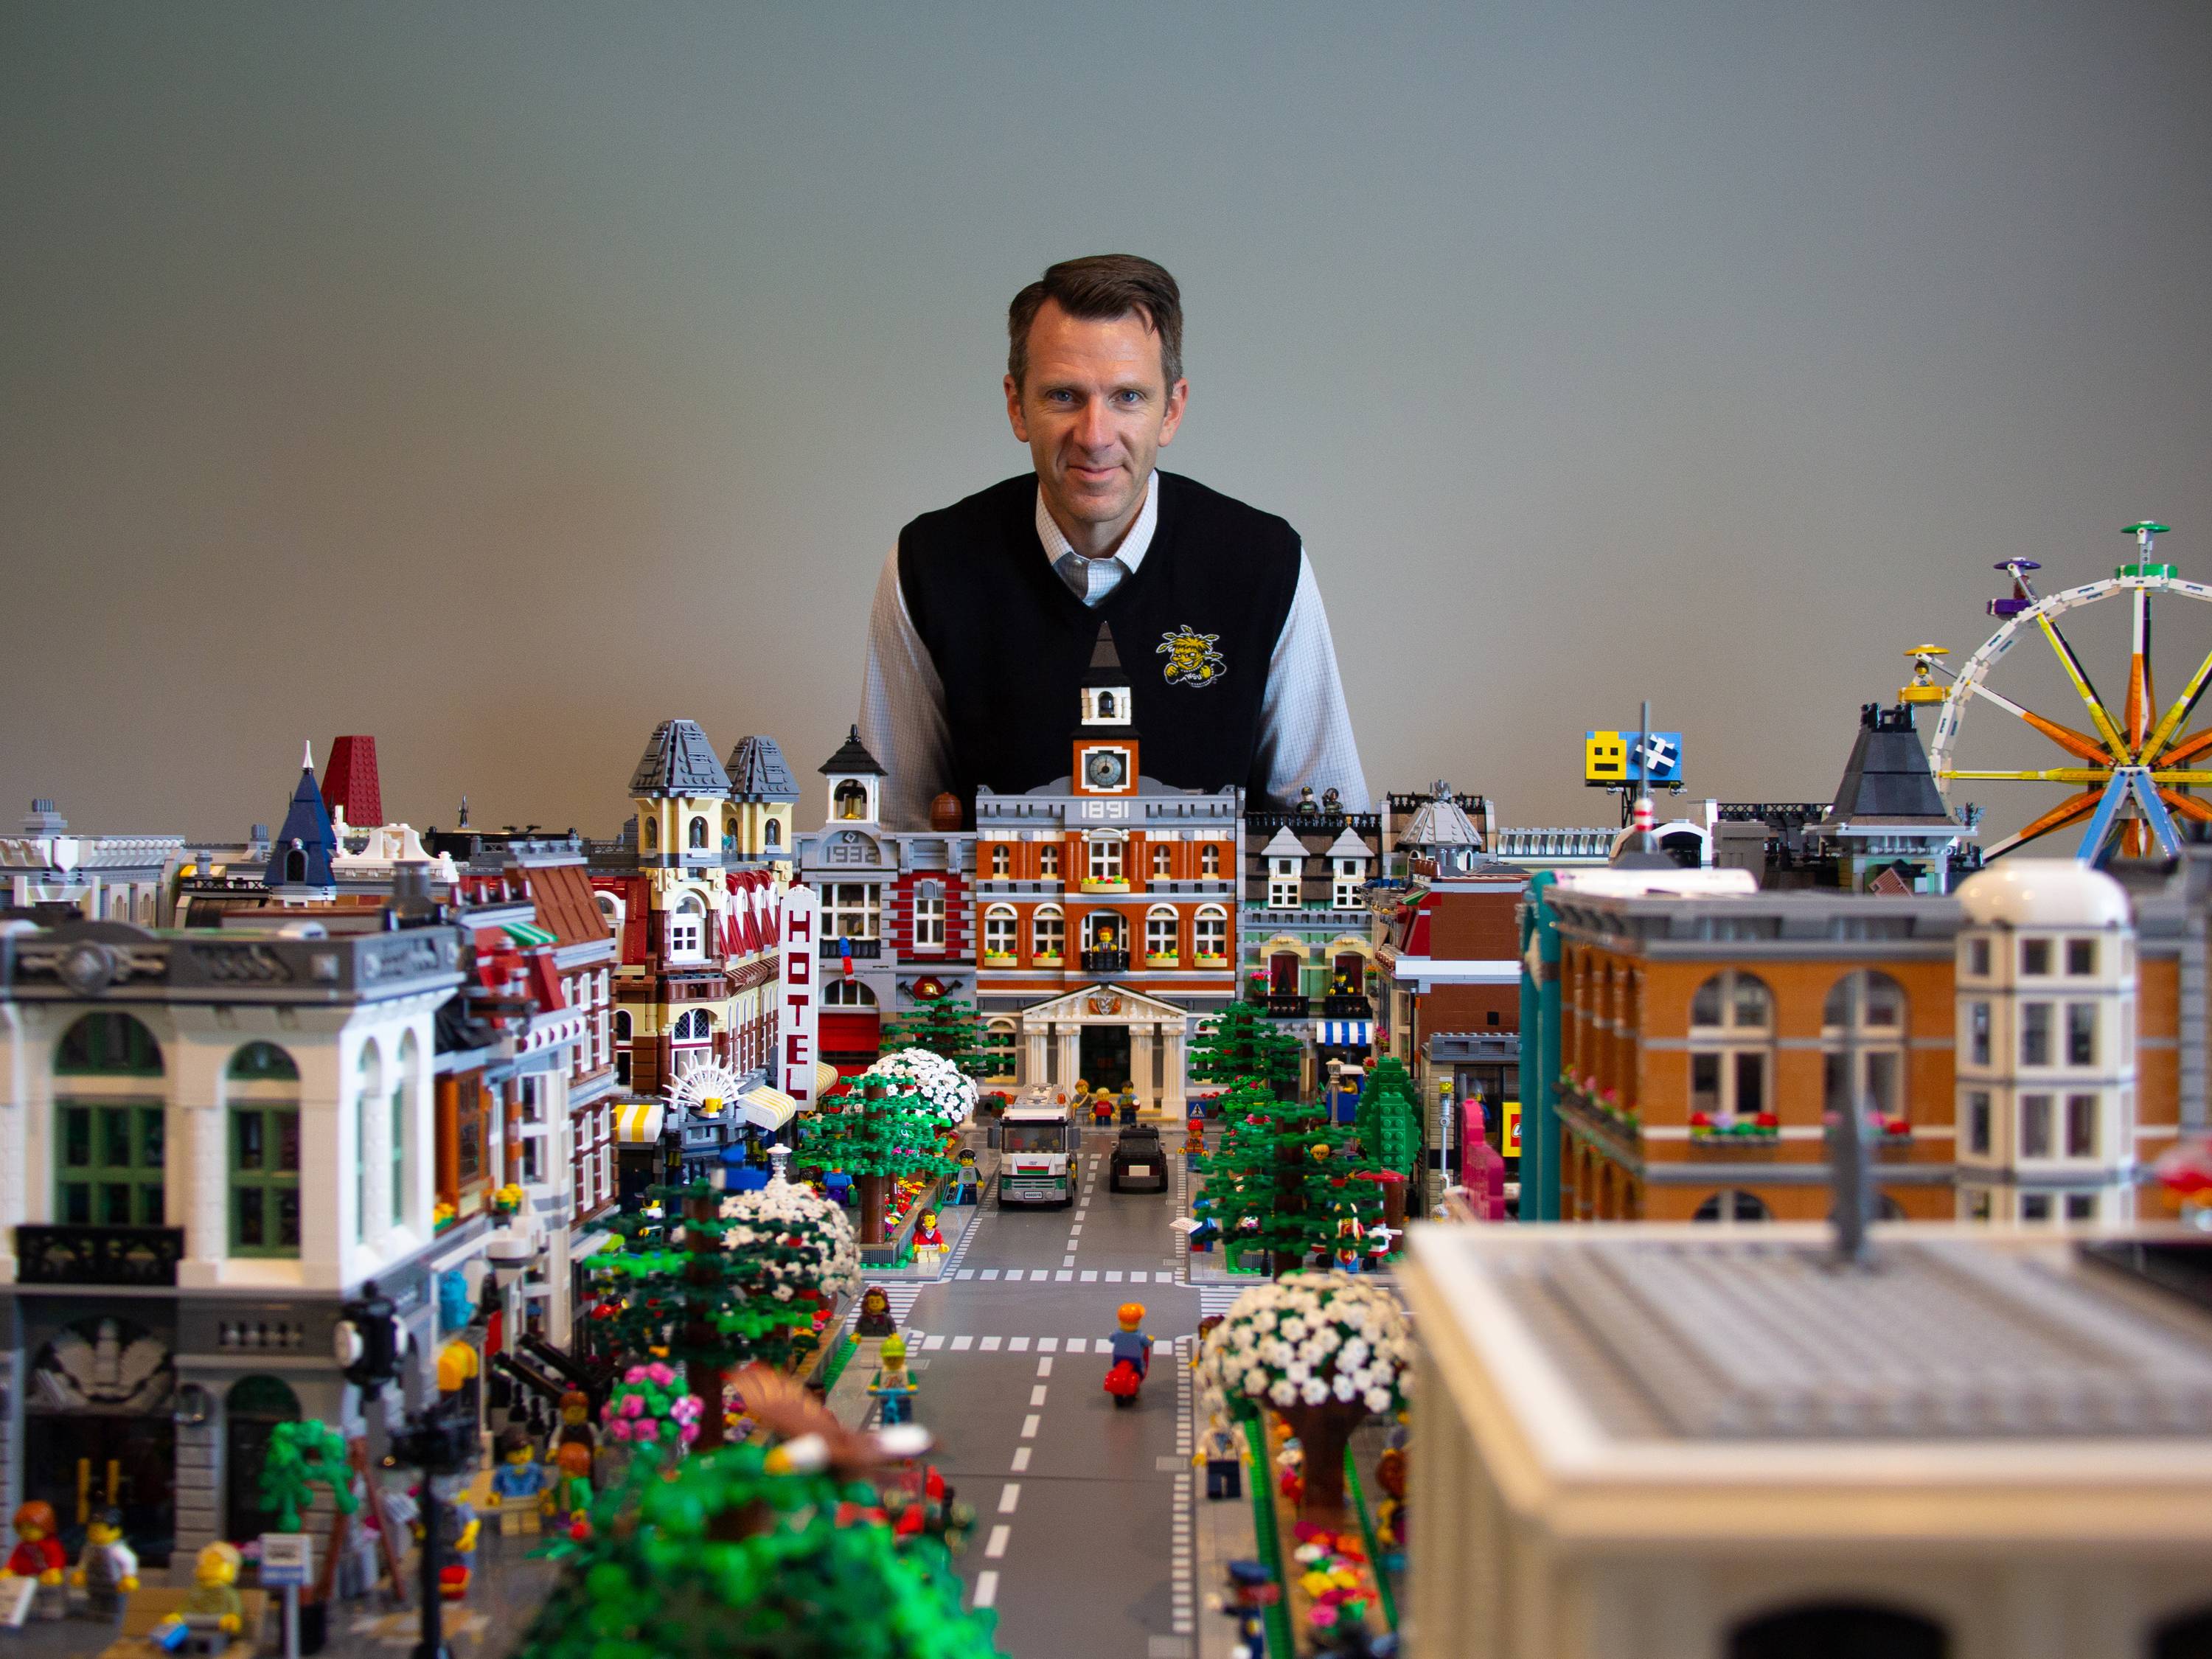 Engineering dean gets creative with his own LEGO | Wichita State